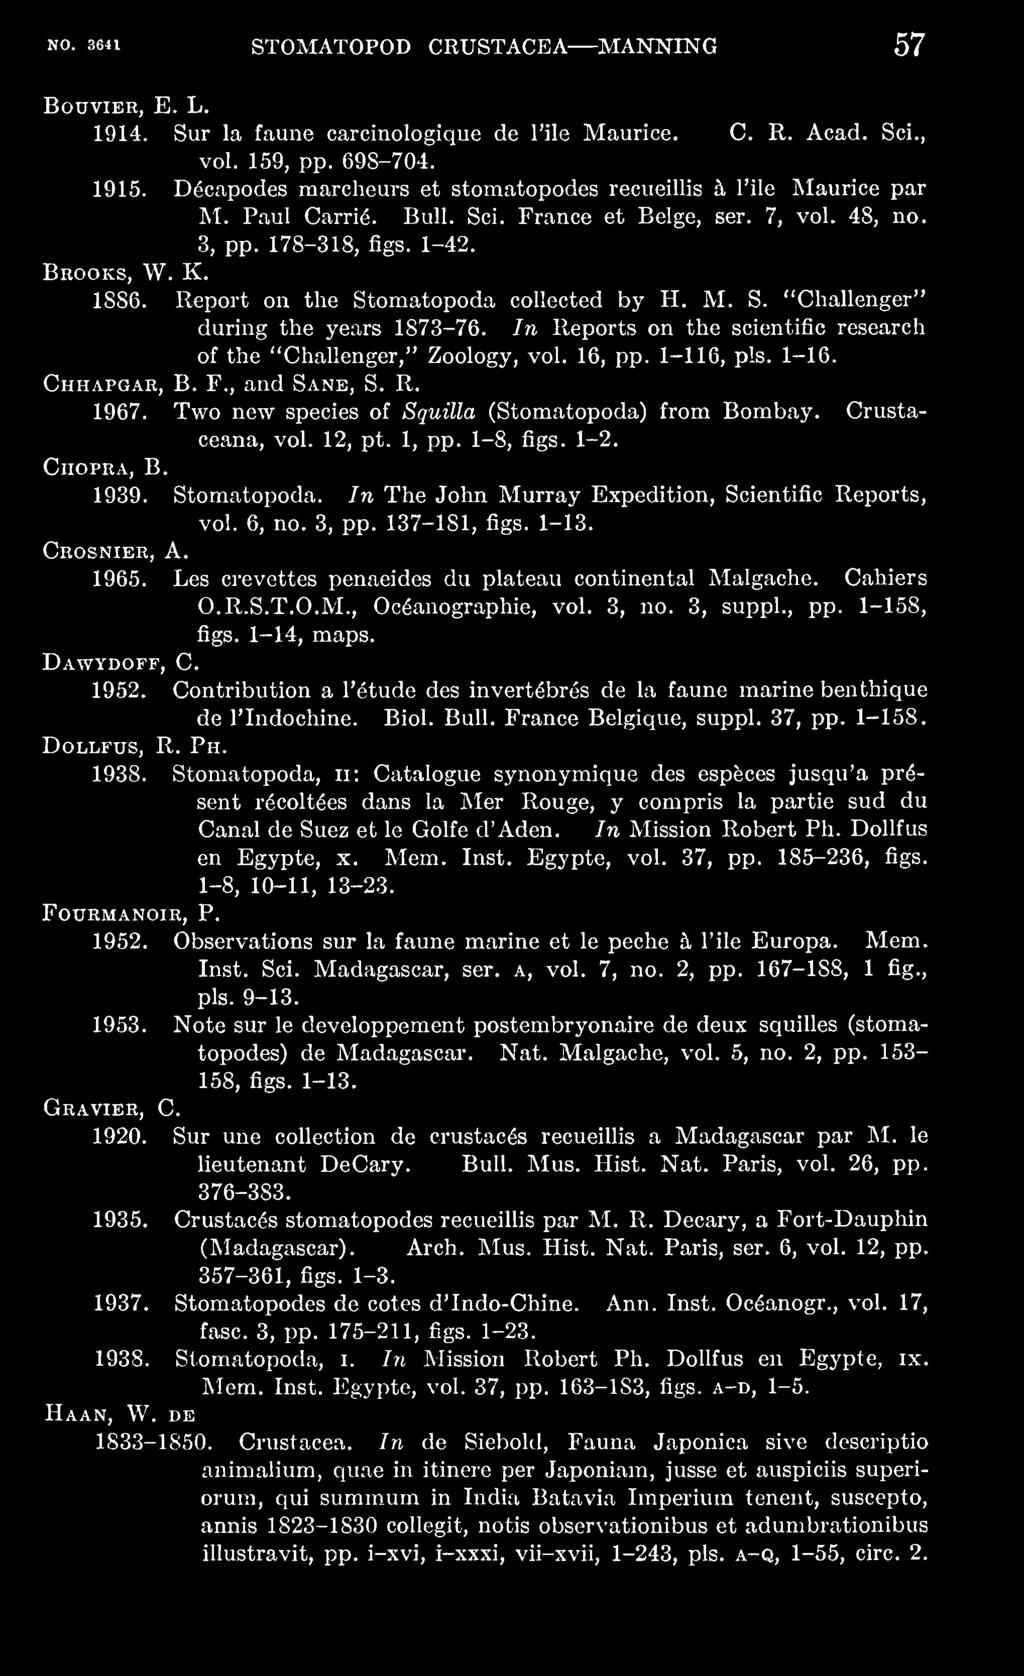 Report on the Stomatopoda collected by H. M. S. "Challenger" during the years 1873-76. In Reports on the scientific research Chopra, B. of the "Challenger," Zoology, vol. 16, pp. 1-116, pis. 1-16.